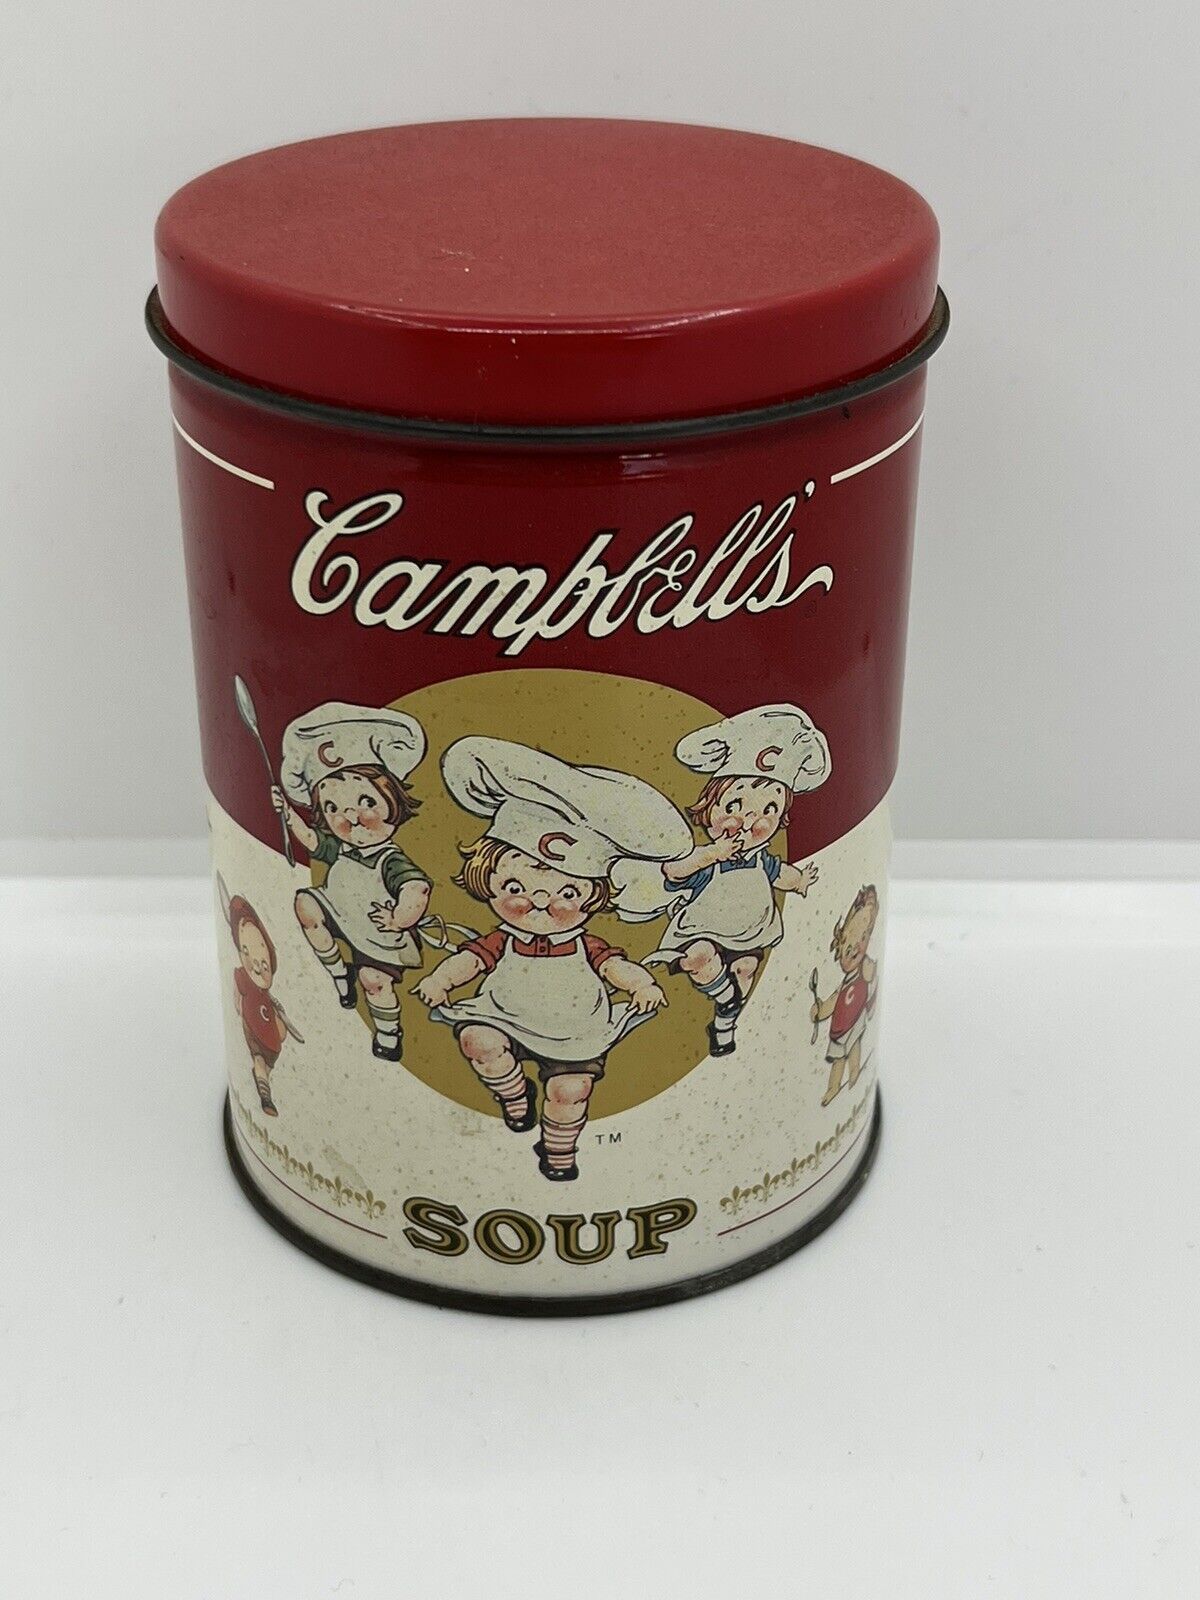 Vintage Campbells Soup Puzzle Vintage Tin Can With Campbells Babies